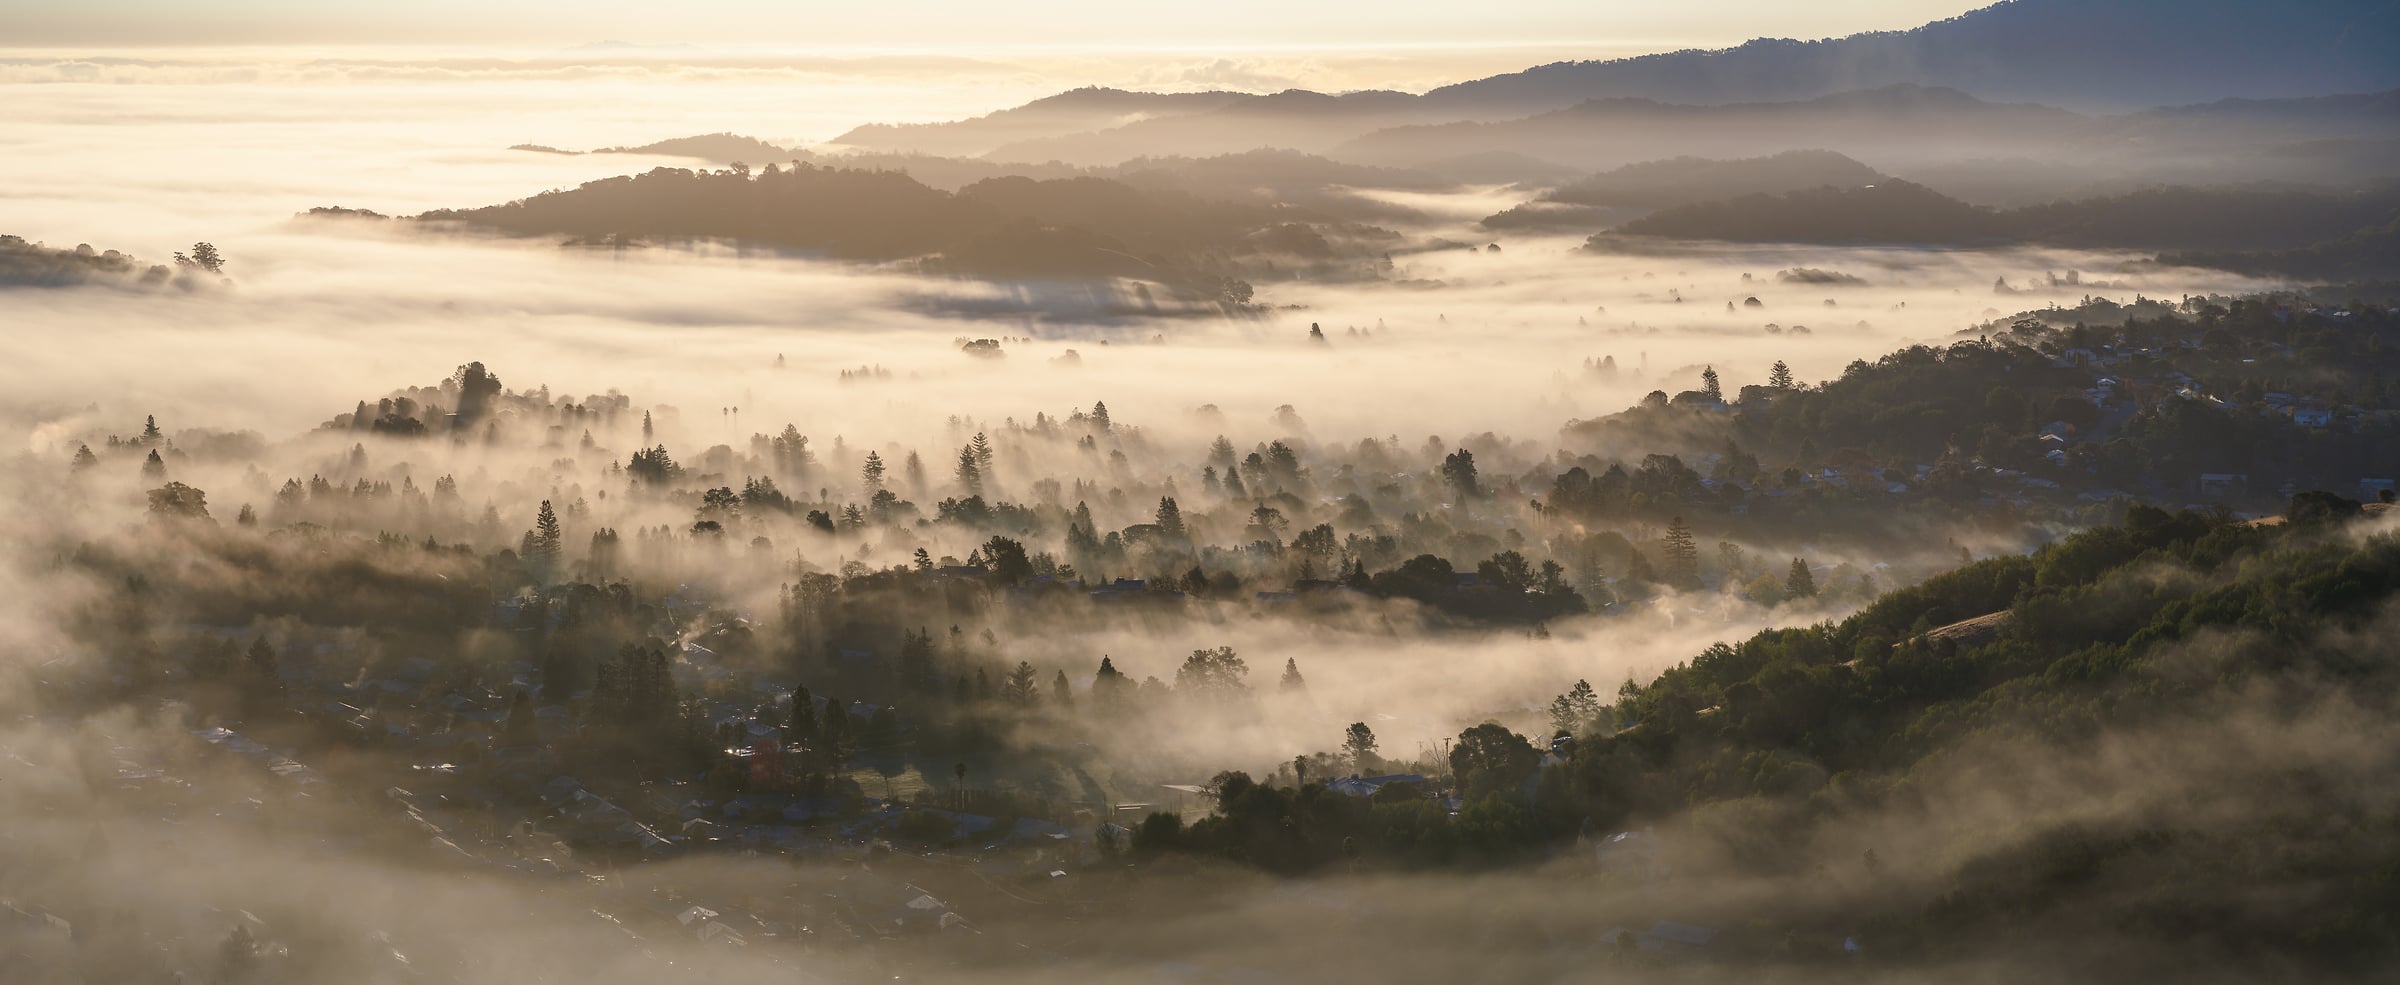 216 megapixels! A very high resolution, large-format VAST photo print of a valley with fog and trees at sunrise; landscape photograph created by Jeff Lewis in Marin County, California.